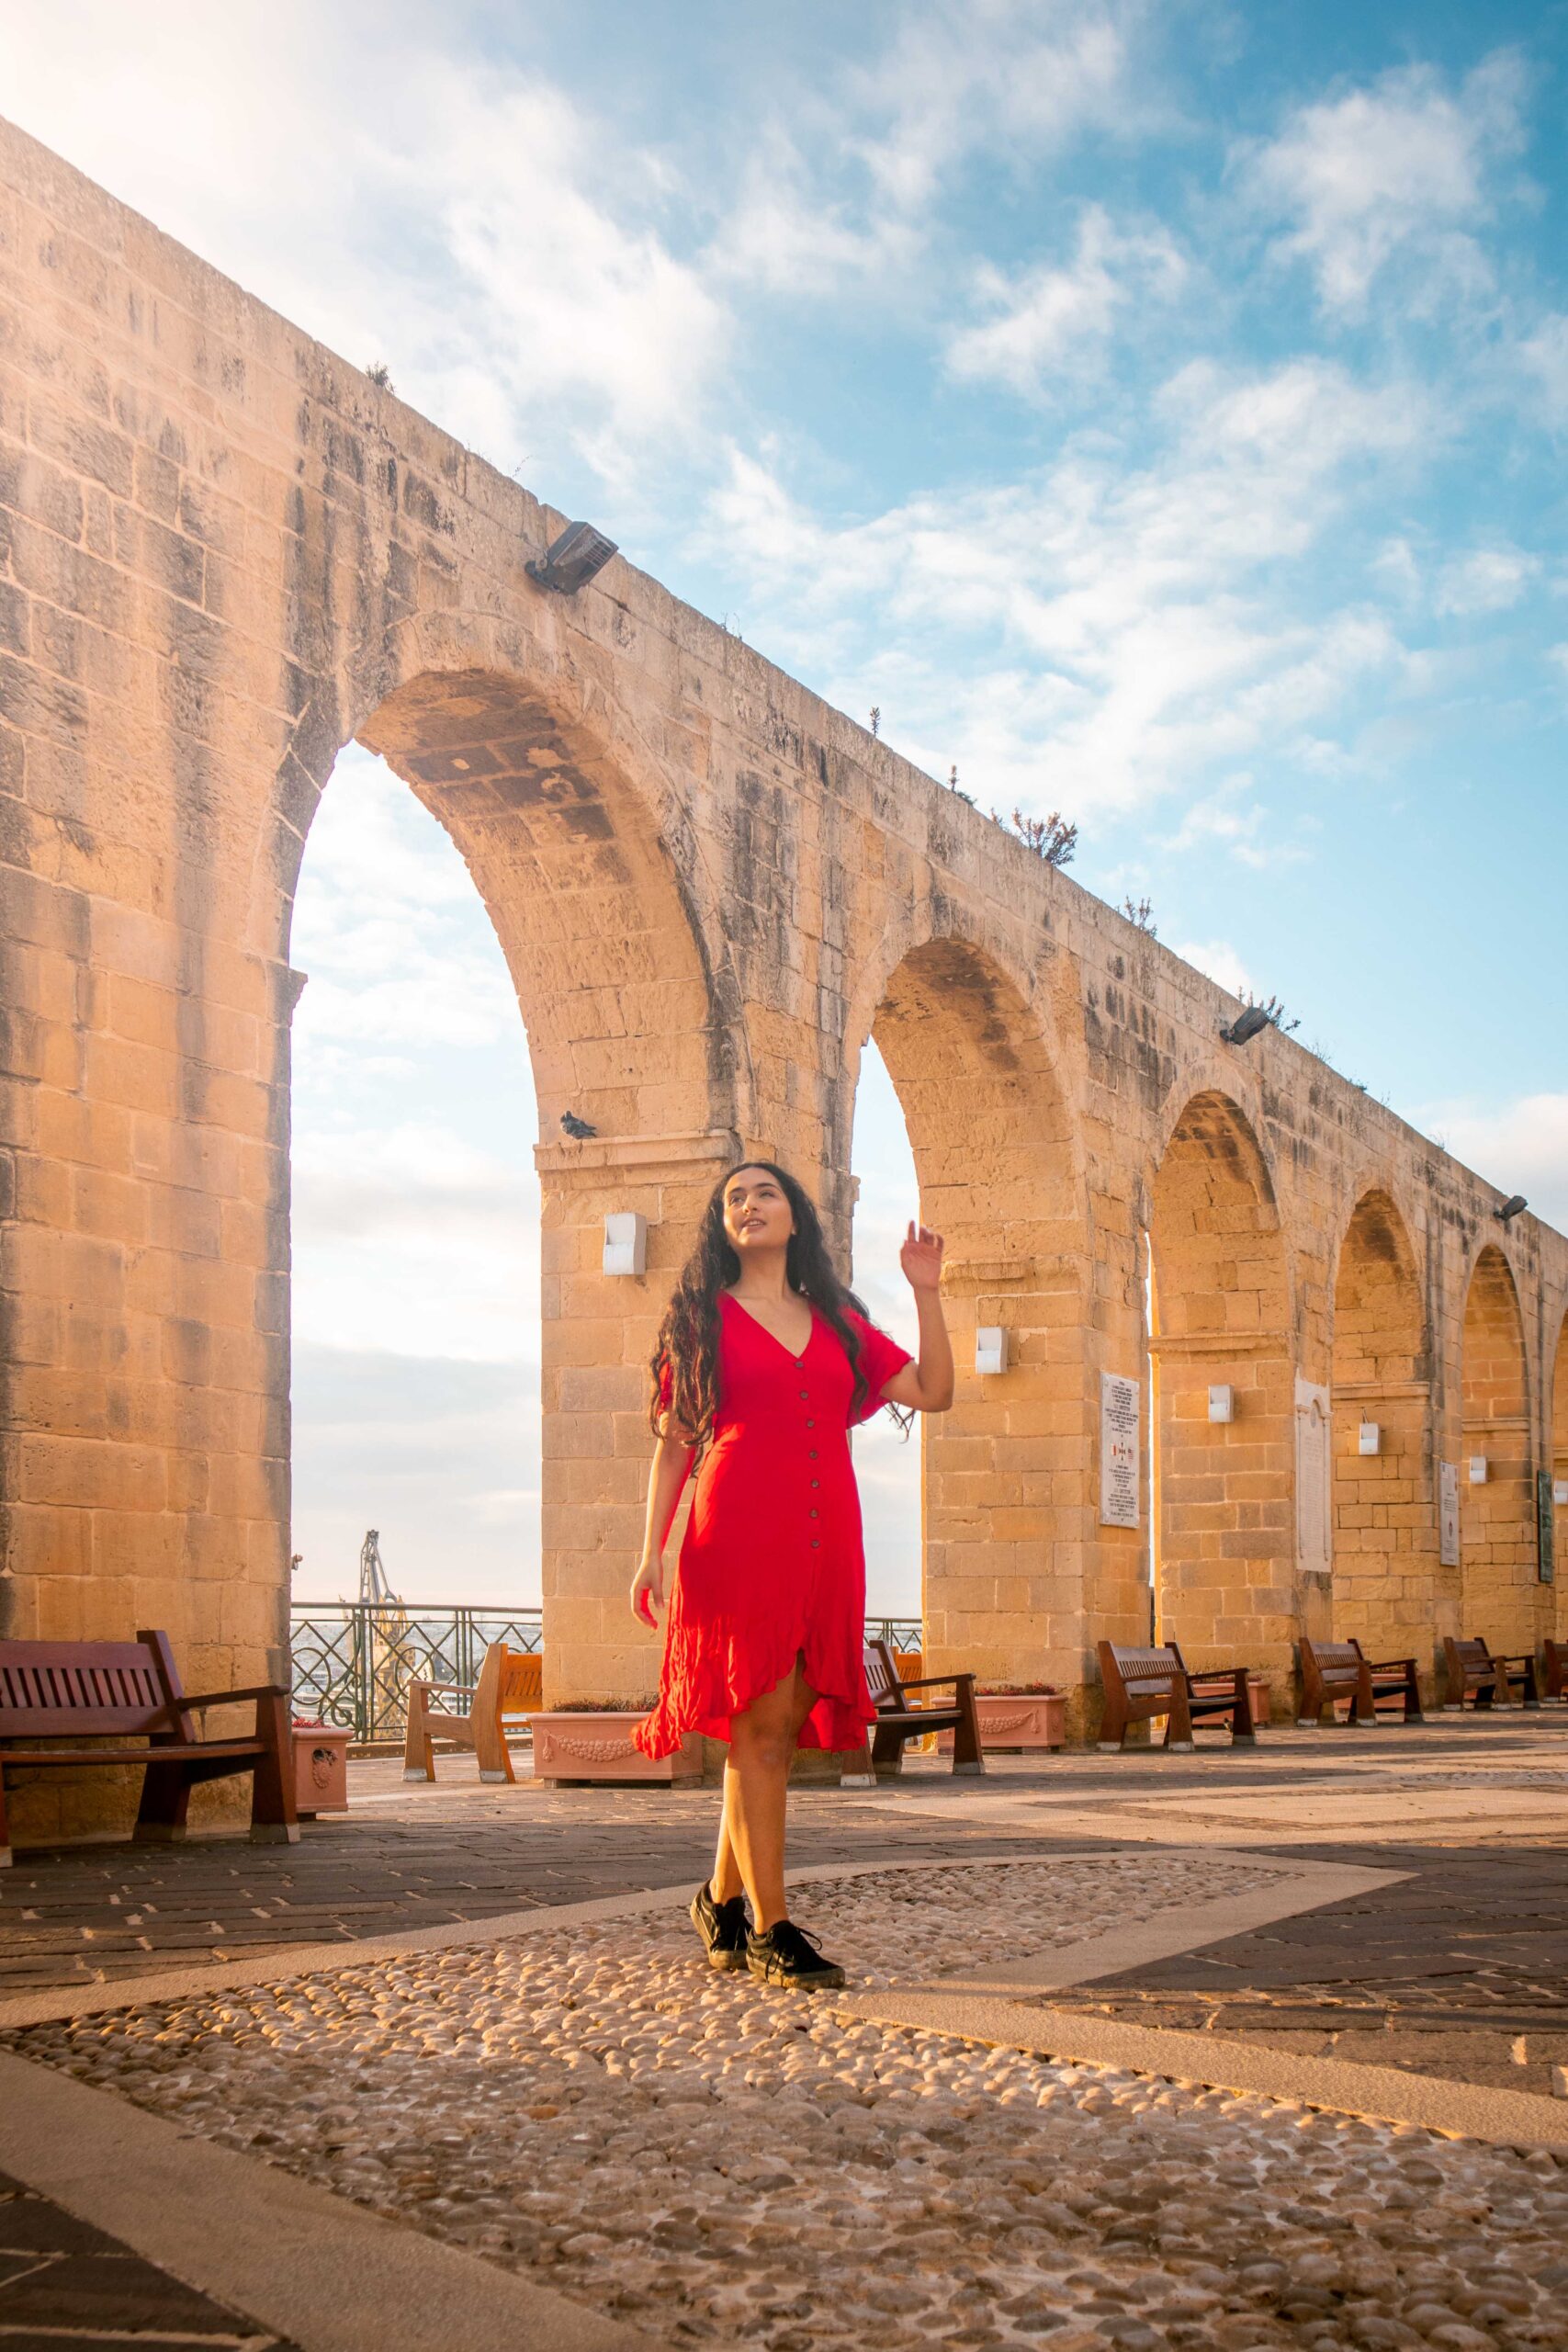 Woman wearing a red dress in front of the arches of the Upper Barrakka Gardens of Valletta, Malta